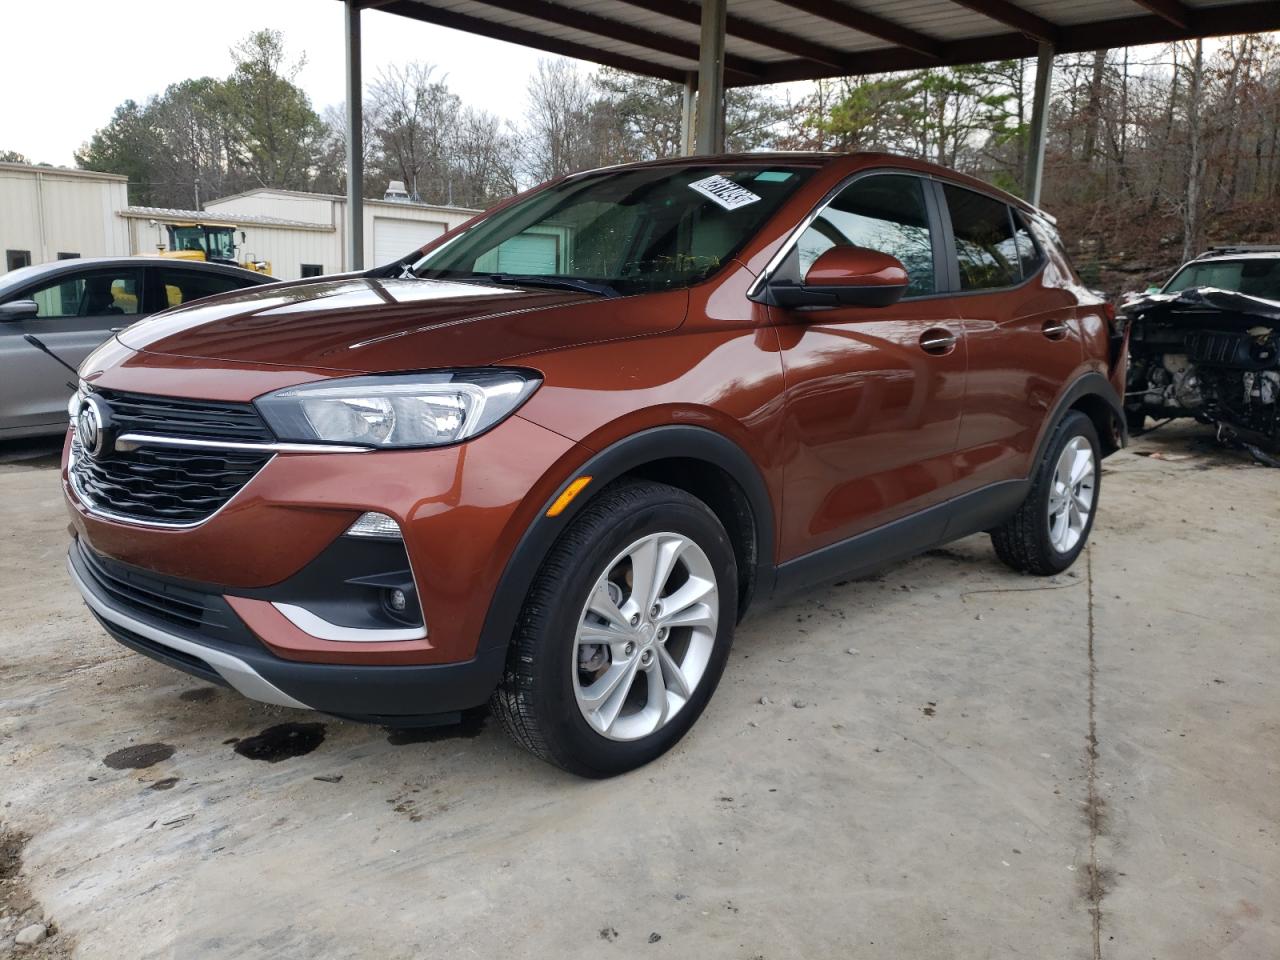 KL4MMBS29LB****** Salvage and Wrecked 2020 Buick Encore in AL - Hueytown